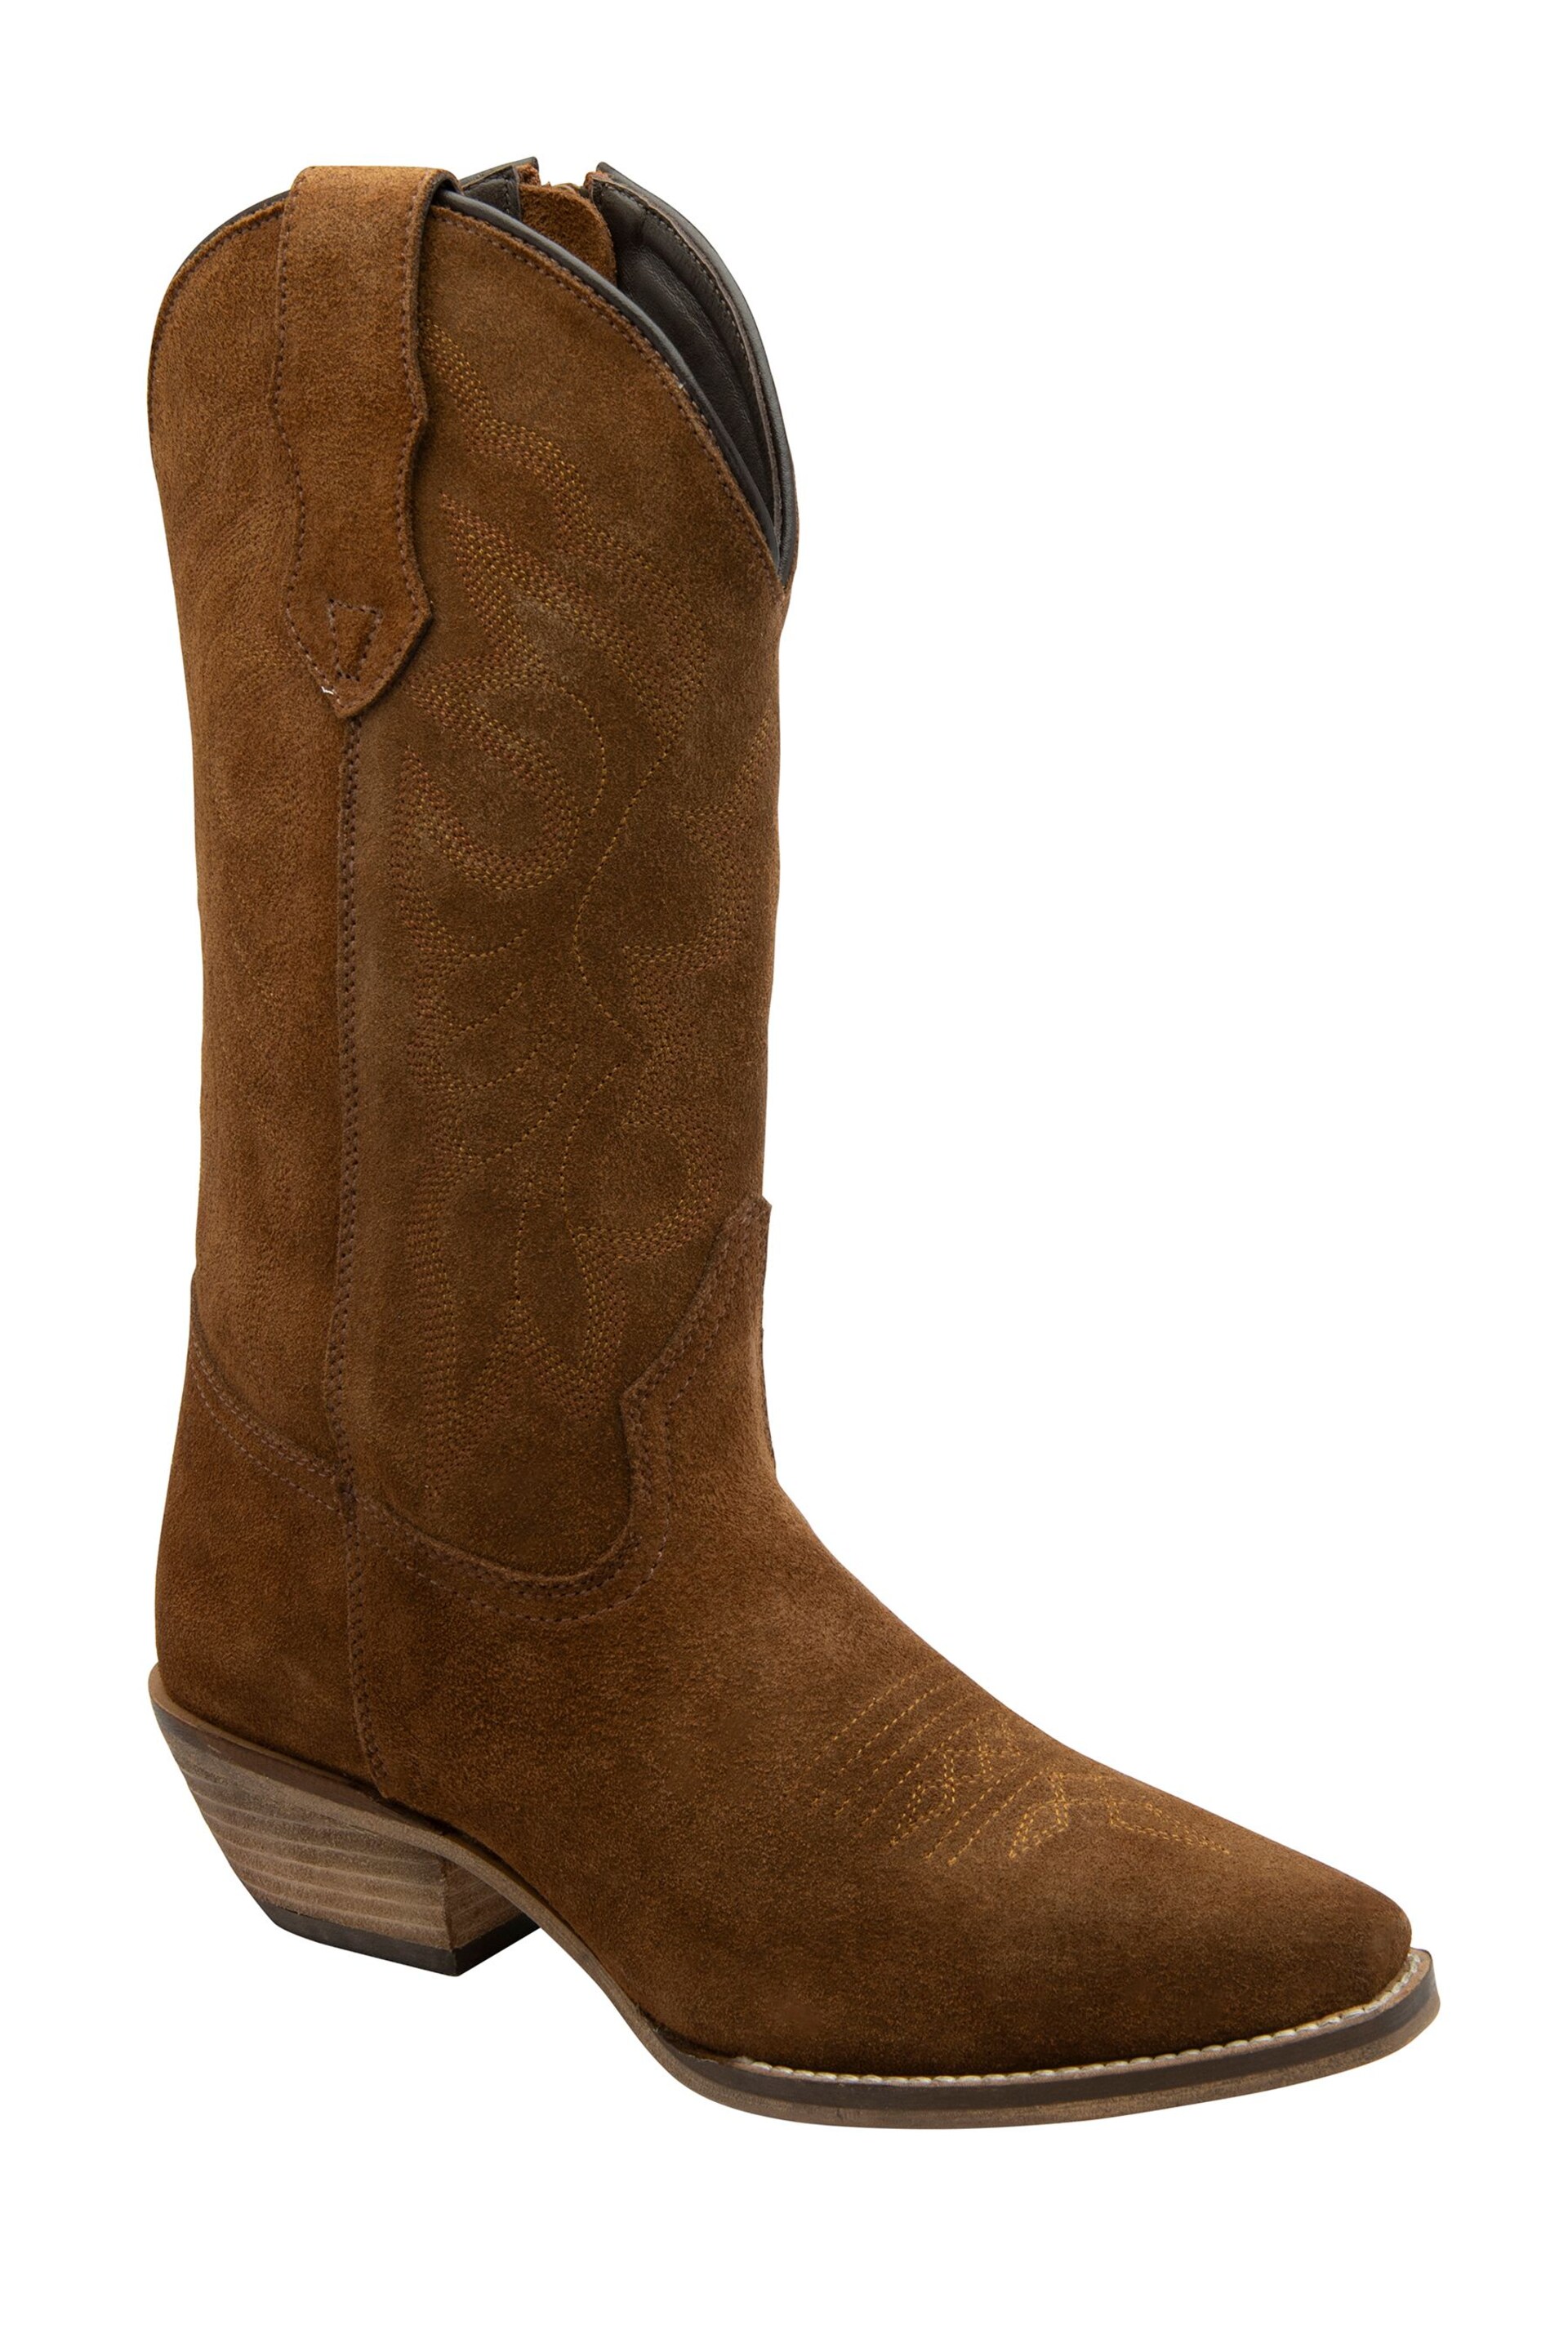 Ravel Brown Leather Calf High Cowboy Western Boots - Image 1 of 4